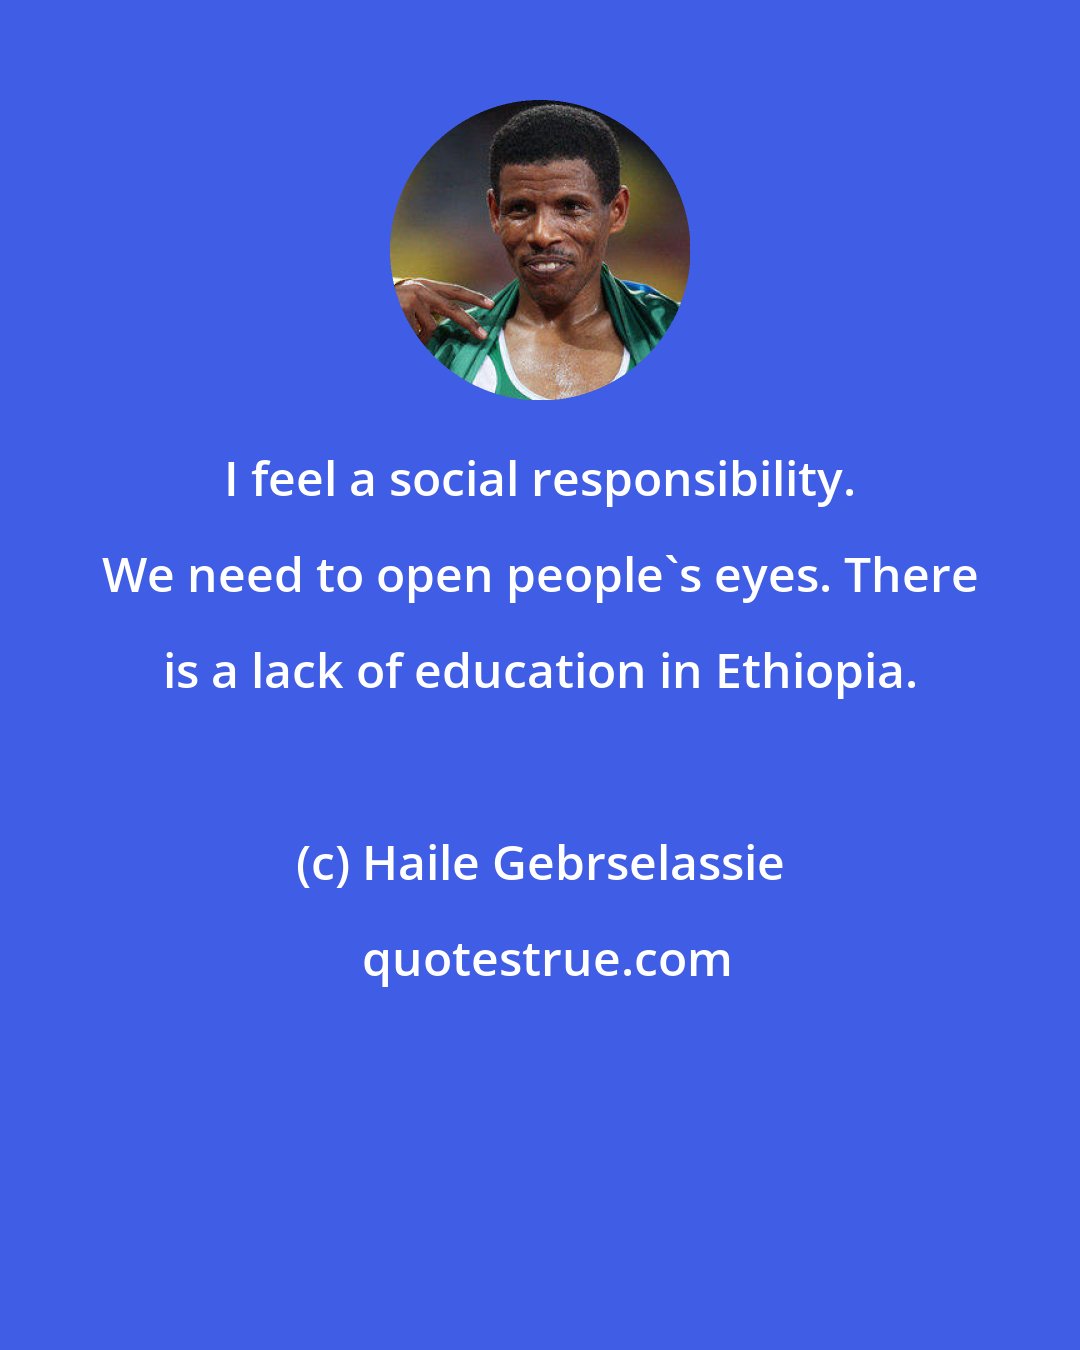 Haile Gebrselassie: I feel a social responsibility. We need to open people's eyes. There is a lack of education in Ethiopia.